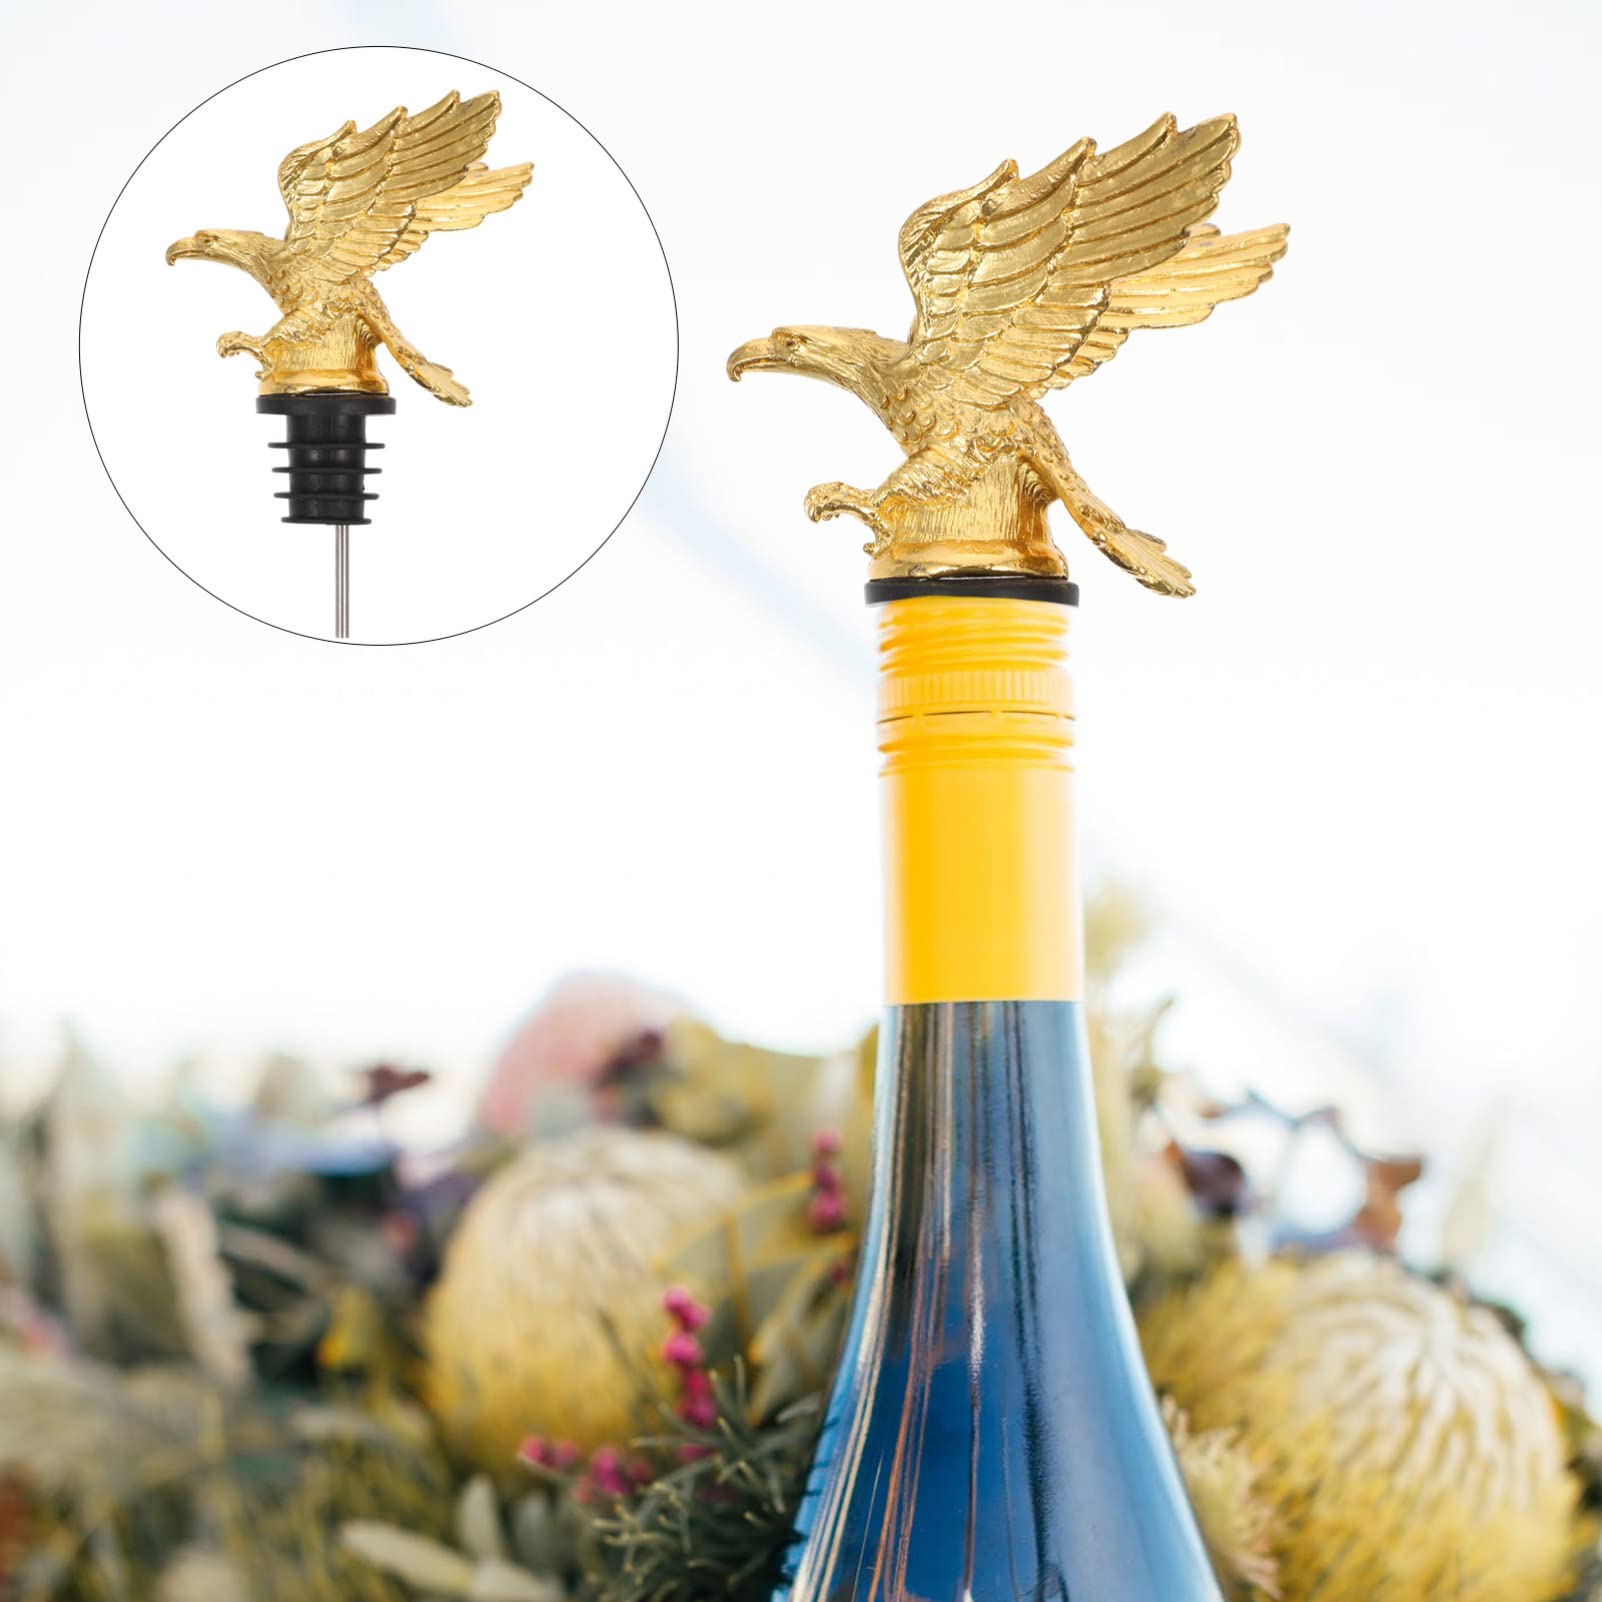 Hemoton Wine Pourer Spout Alloy Eagle Wine Bottle Stopper Liquor Pourers Animal Wine Aerator Wine Purifier Gifts for Christmas New Year Golden